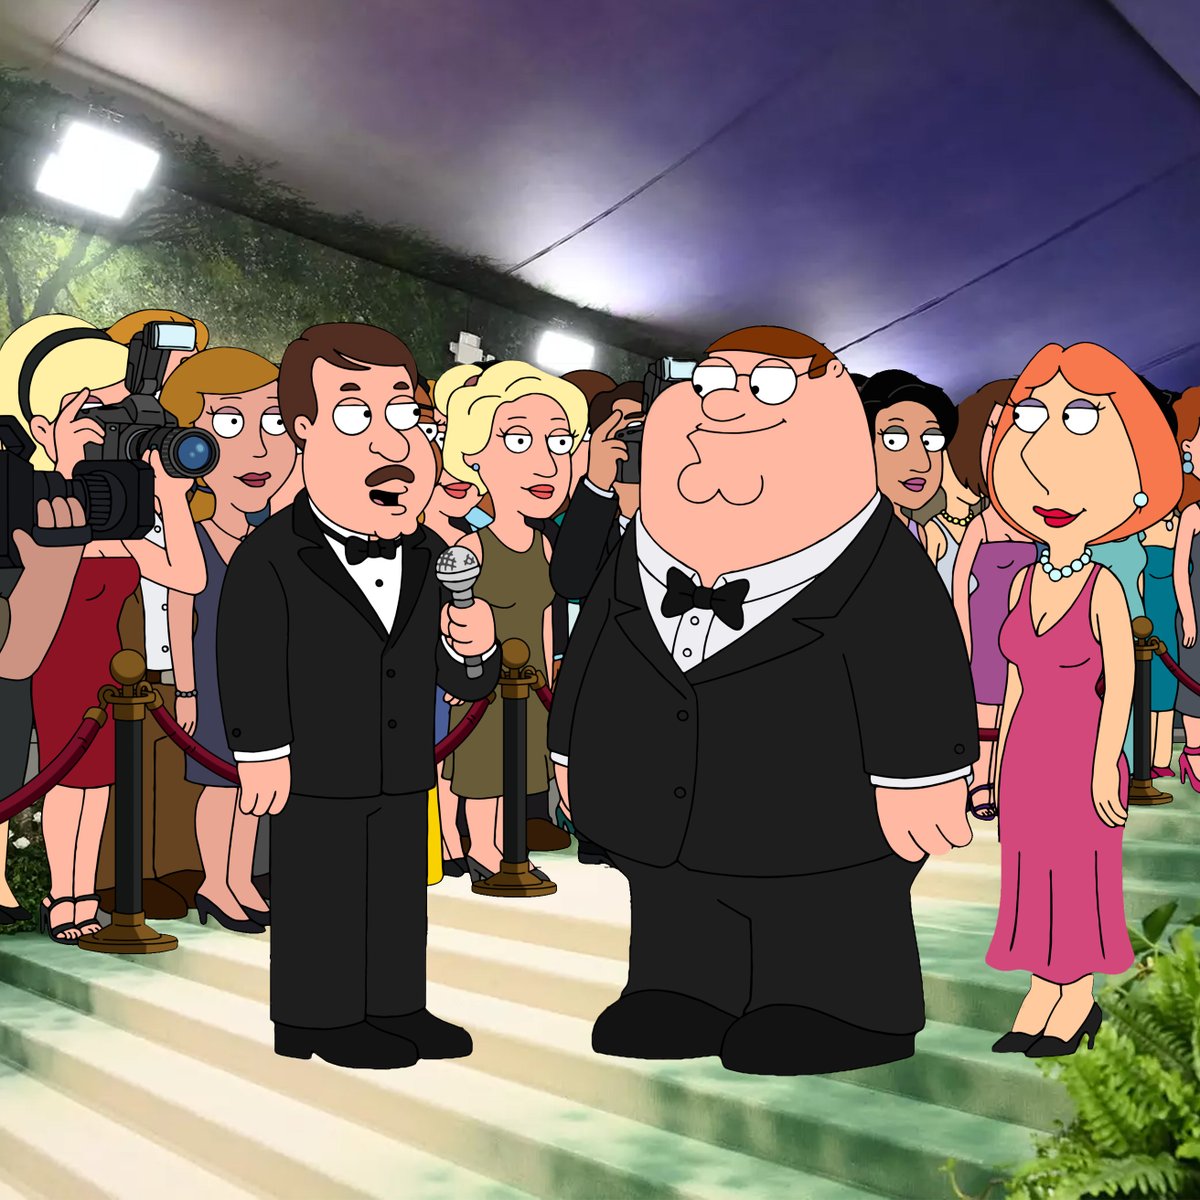 peter & lois have just arrived at the #metgala